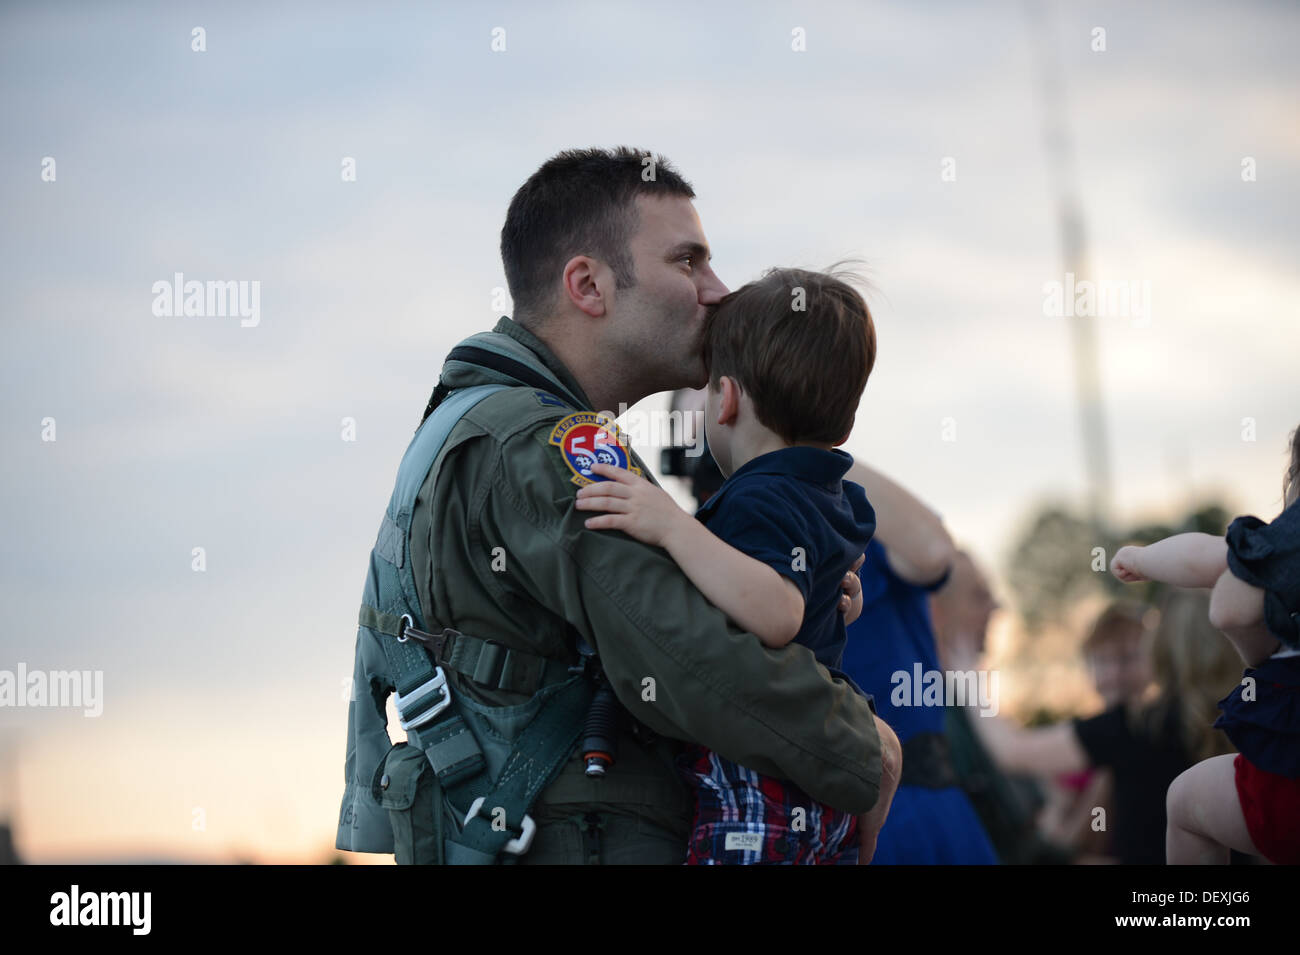 SHAW AIR FORCE BASE, S.C. – U.S. Air Force Capt. Robbie Sandwith, a F-16 pilot assigned to the 55th Fighter Squadron, Shaw Air Force Base kisses his son on the forehead upon returning home after a six-month deployment to Osan Air Base, Republic of Korea. Stock Photo